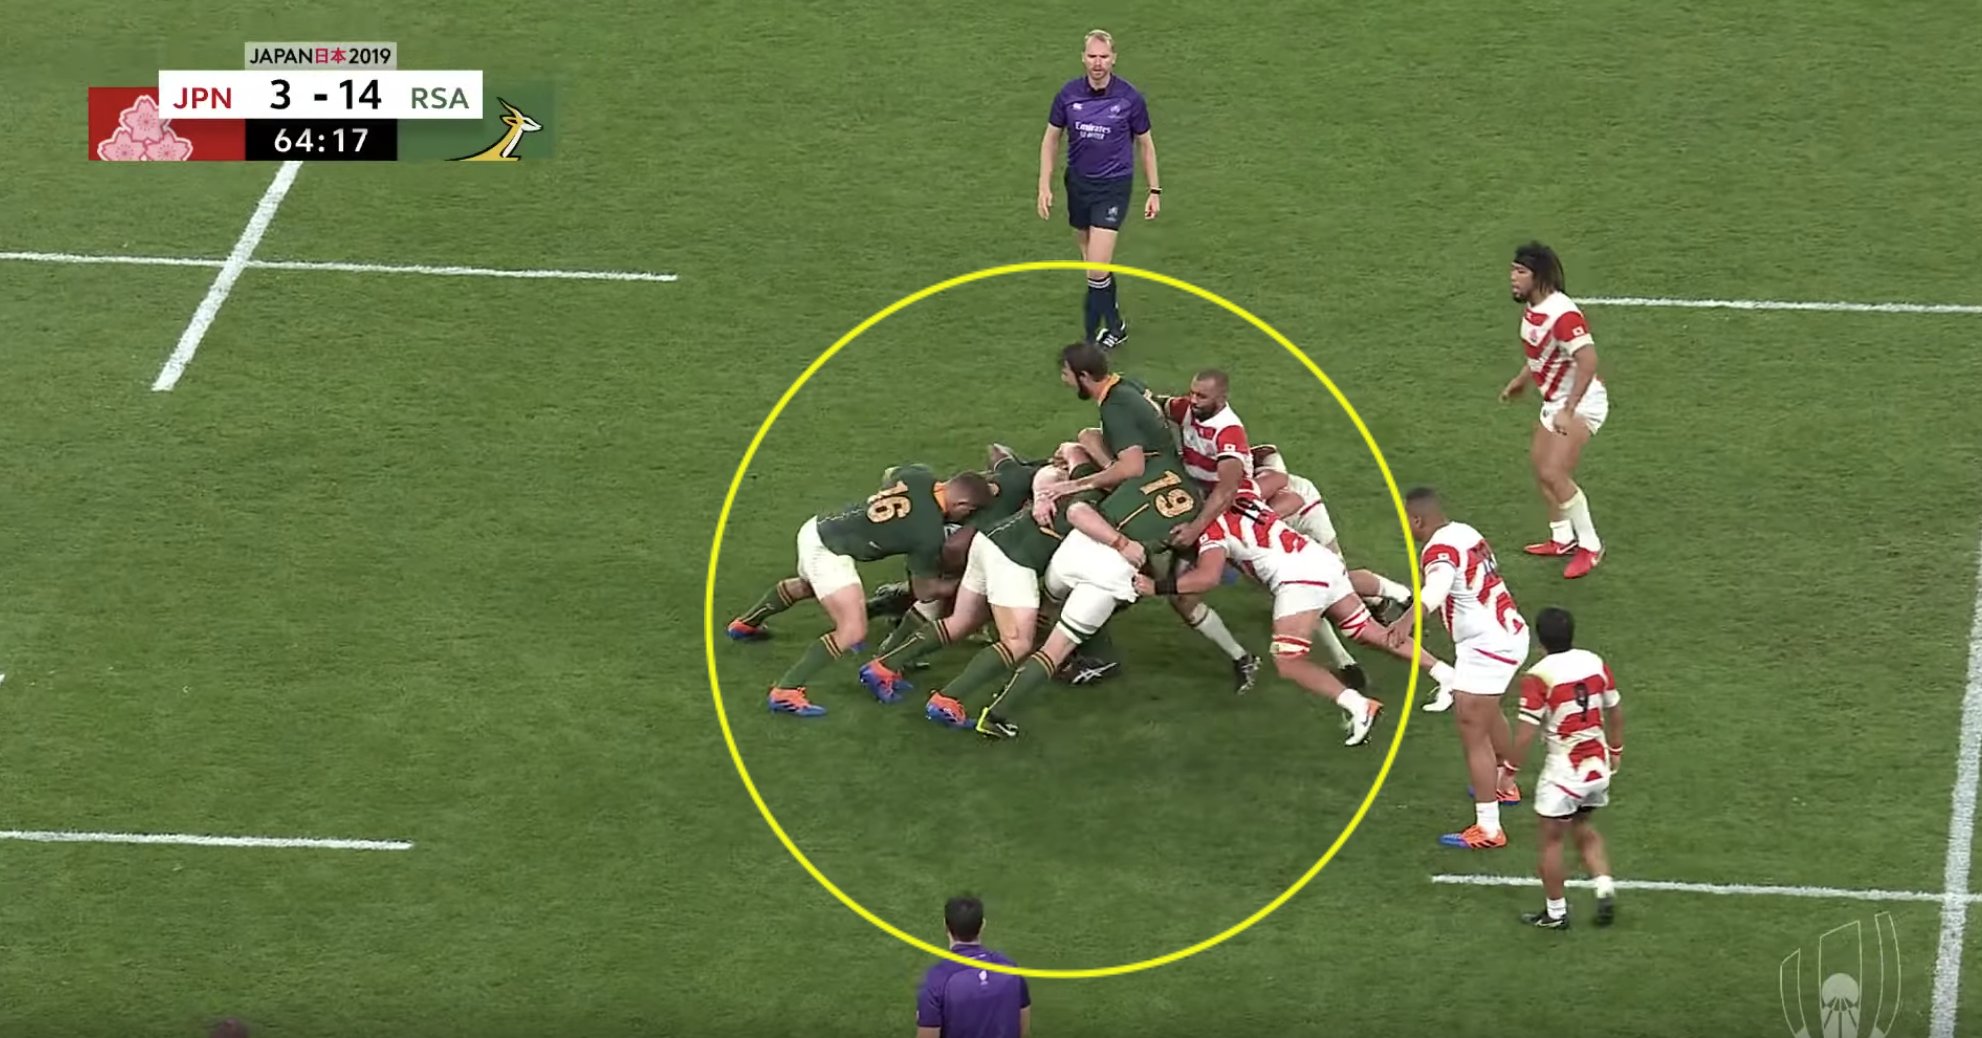 The South African maul that was so devastating that it couldn't be stopped